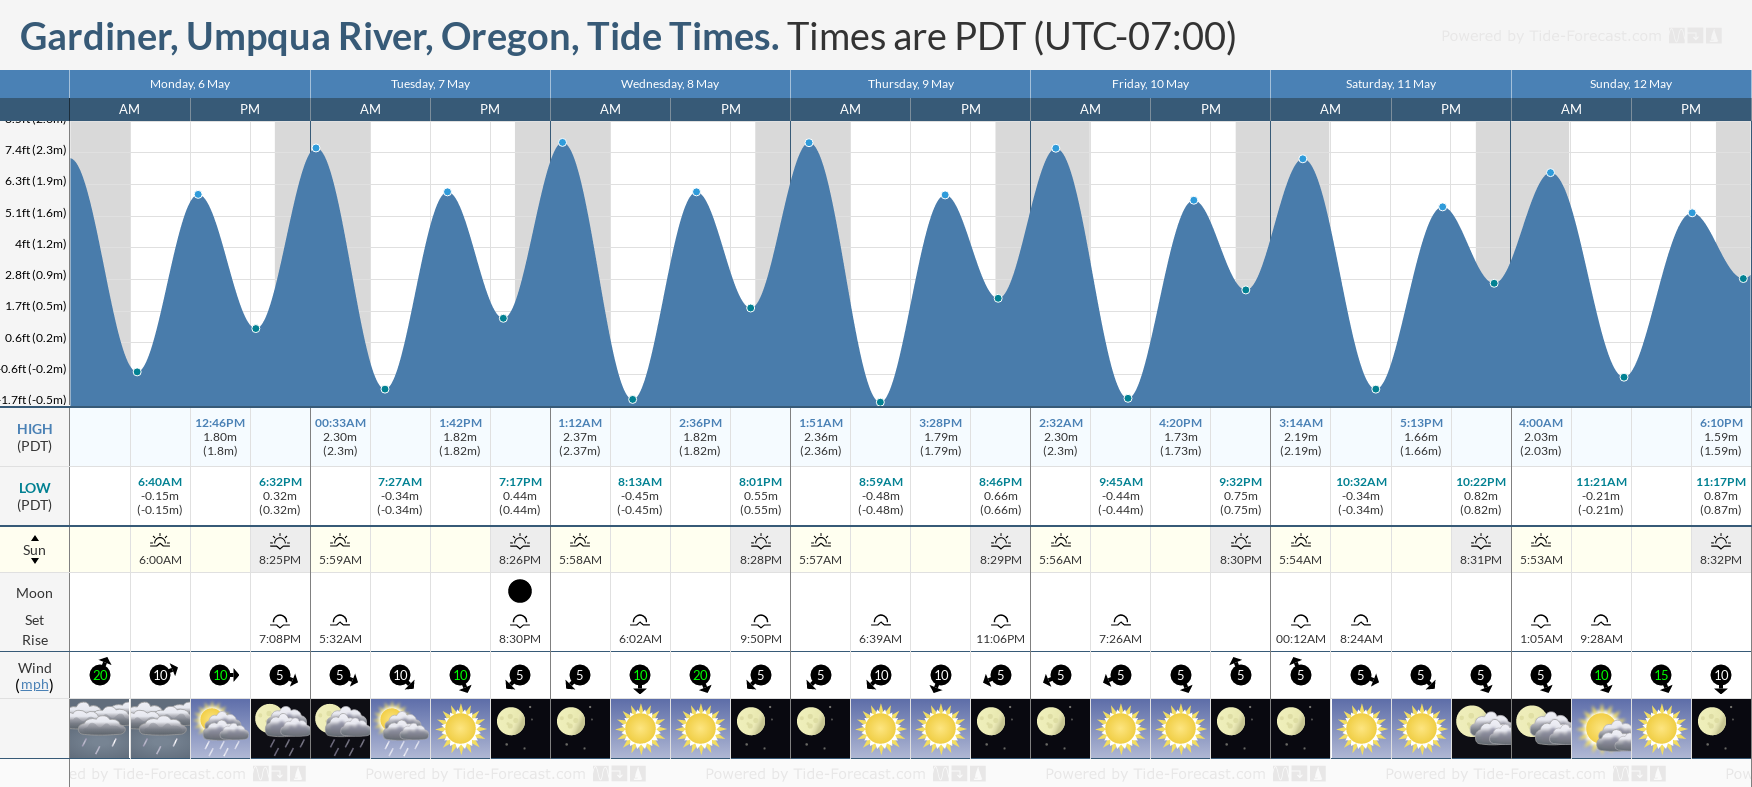 Gardiner, Umpqua River, Oregon Tide Chart including high and low tide times for the next 7 days